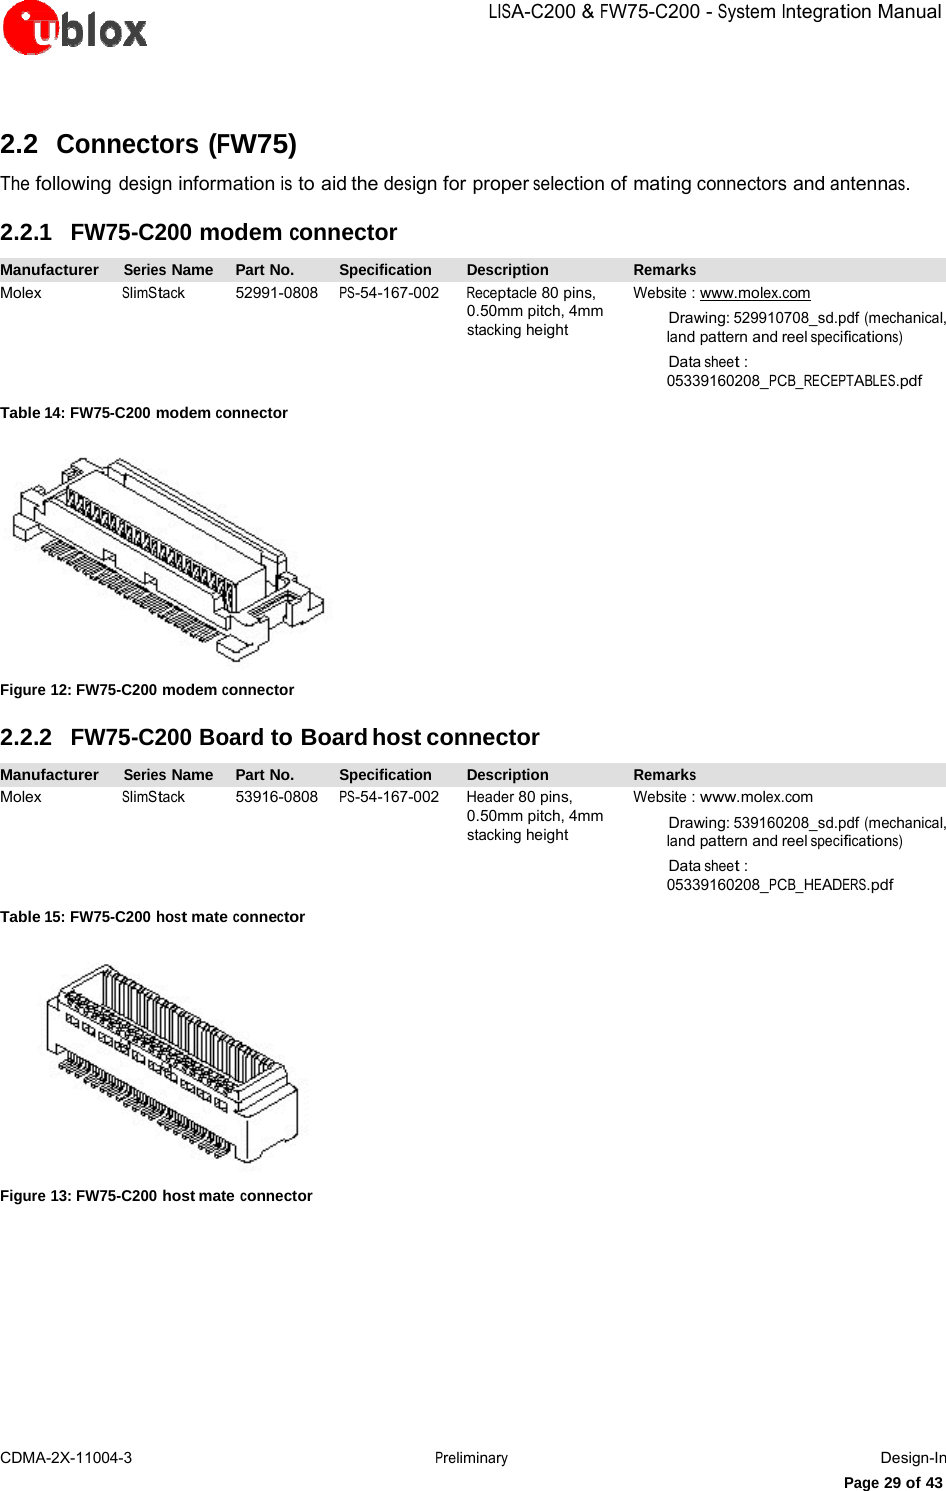 LISA-C200&amp;FW75-C200-System IntegrationManualCDMA-2X-11004-3 PreliminaryDesign-InPage 29 of 432.2  Connectors (FW75) The following design information is to aid the design for proper selection of mating connectors and antennas. 2.2.1  FW75-C200 modem connector Manufacturer  Series Name Part No. Specification  Description  Remarks Molex SlimStack 52991-0808 PS-54-167-002 Receptacle 80 pins, 0.50mm pitch, 4mm stacking height Website : www.molex.com    Drawing: 529910708_sd.pdf (mechanical, land pattern and reel specifications)    Data sheet : 05339160208_PCB_RECEPTABLES.pdf Table 14: FW75-C200 modem connector  Figure 12: FW75-C200 modem connector 2.2.2  FW75-C200 Board to Board host connector Manufacturer  Series Name Part No. Specification  Description  Remarks Molex SlimStack 53916-0808 PS-54-167-002 Header 80 pins, 0.50mm pitch, 4mm stacking height Website : www.molex.com    Drawing: 539160208_sd.pdf (mechanical, land pattern and reel specifications)    Data sheet : 05339160208_PCB_HEADERS.pdf Table 15: FW75-C200 host mate connector  Figure 13: FW75-C200 host mate connector 